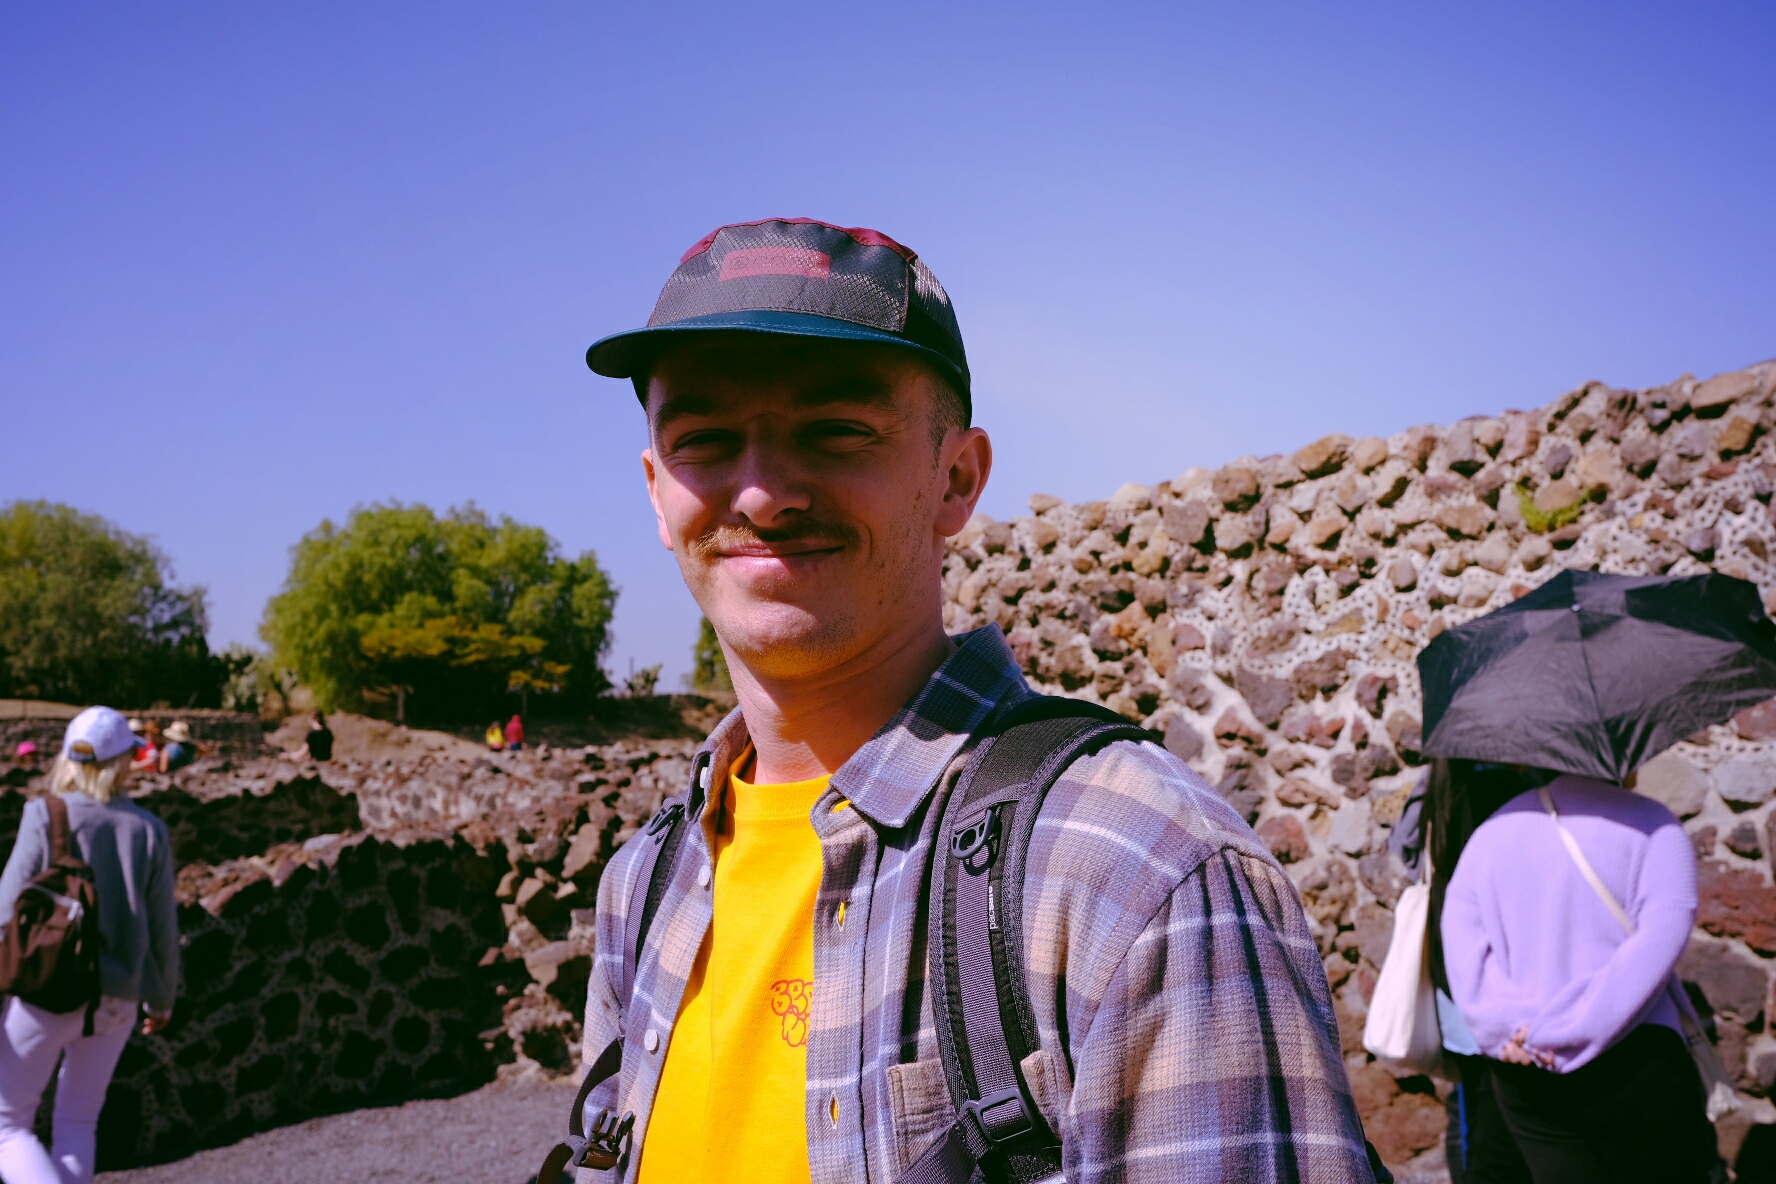 Me (Alan) in the Tehuacán Temple in Mexico